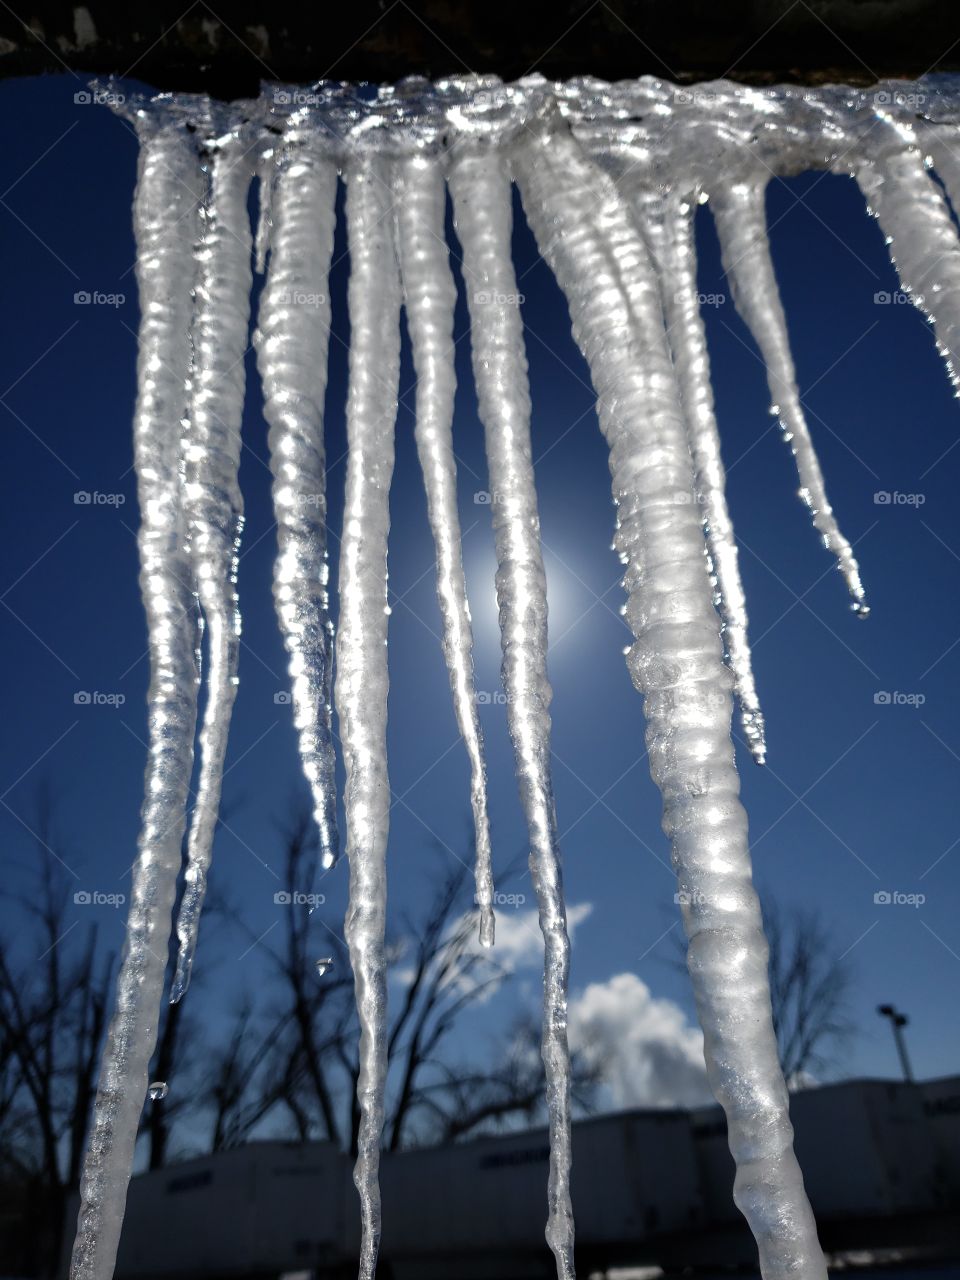 the sun playing behind the icicles